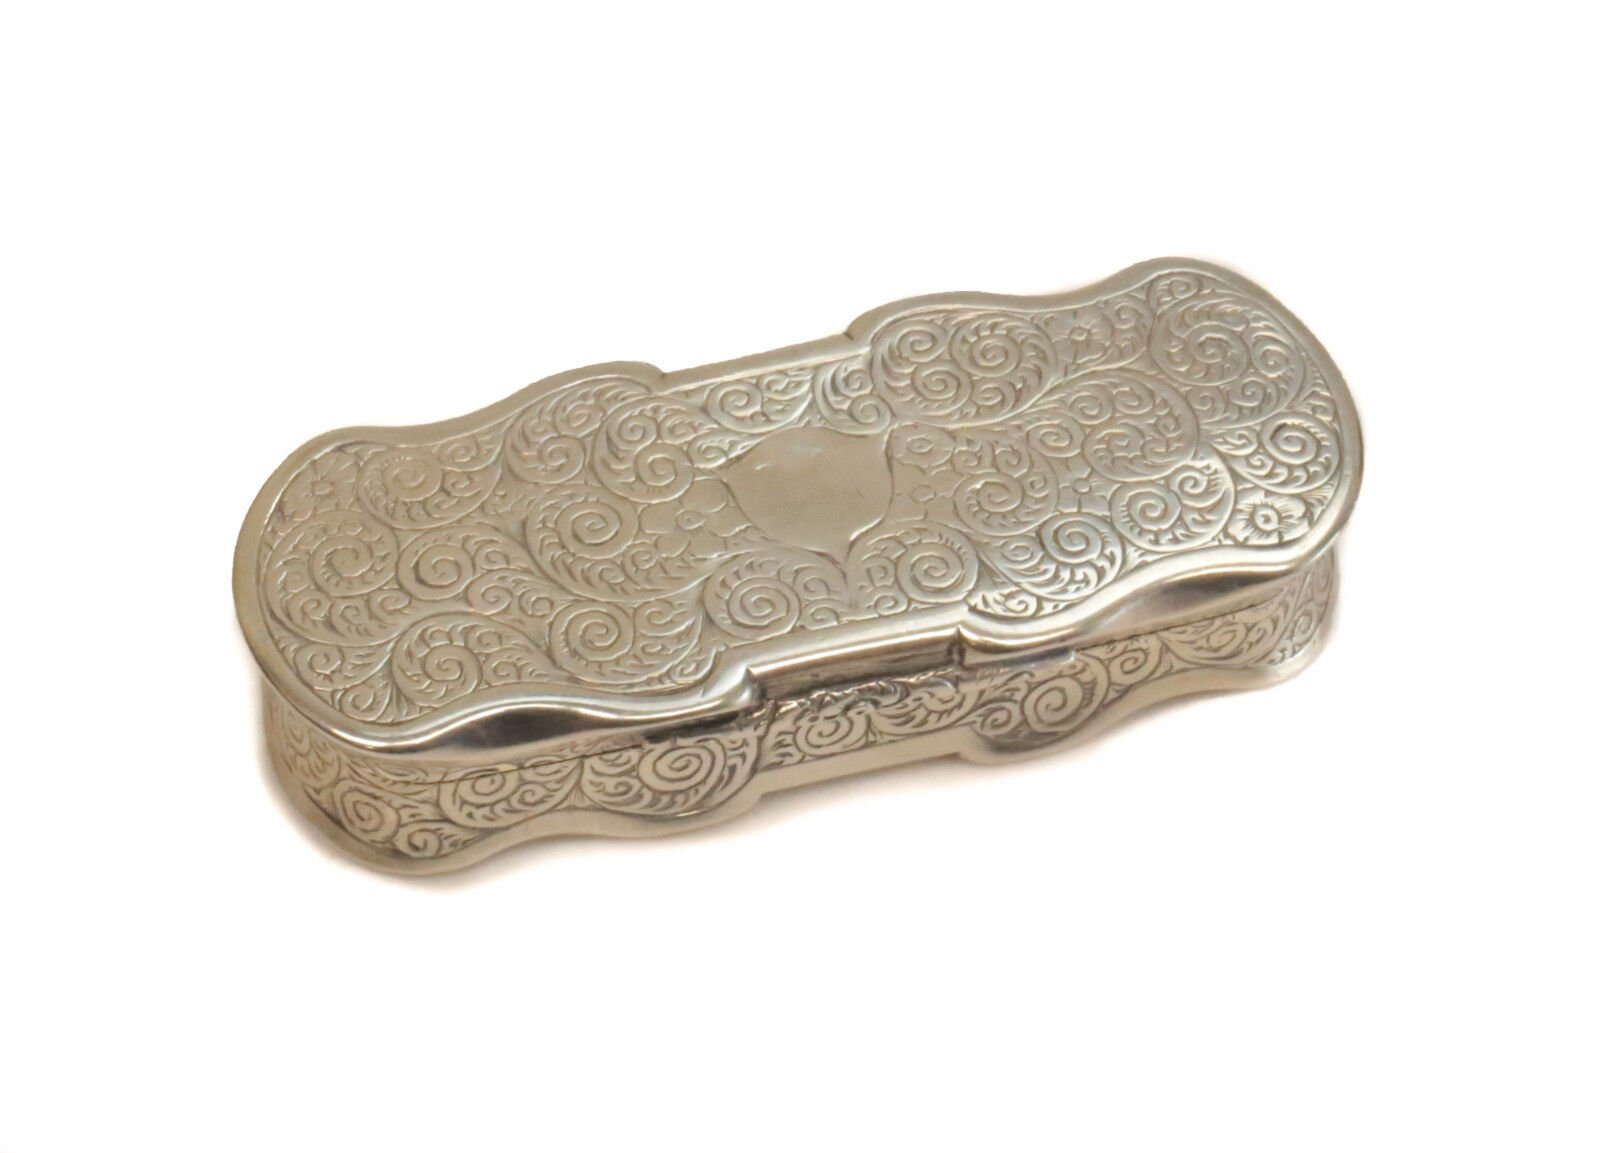 John Tongue Birmingham Sterling Silver Snuff Pill Box, 1853, Hand Chased Florals